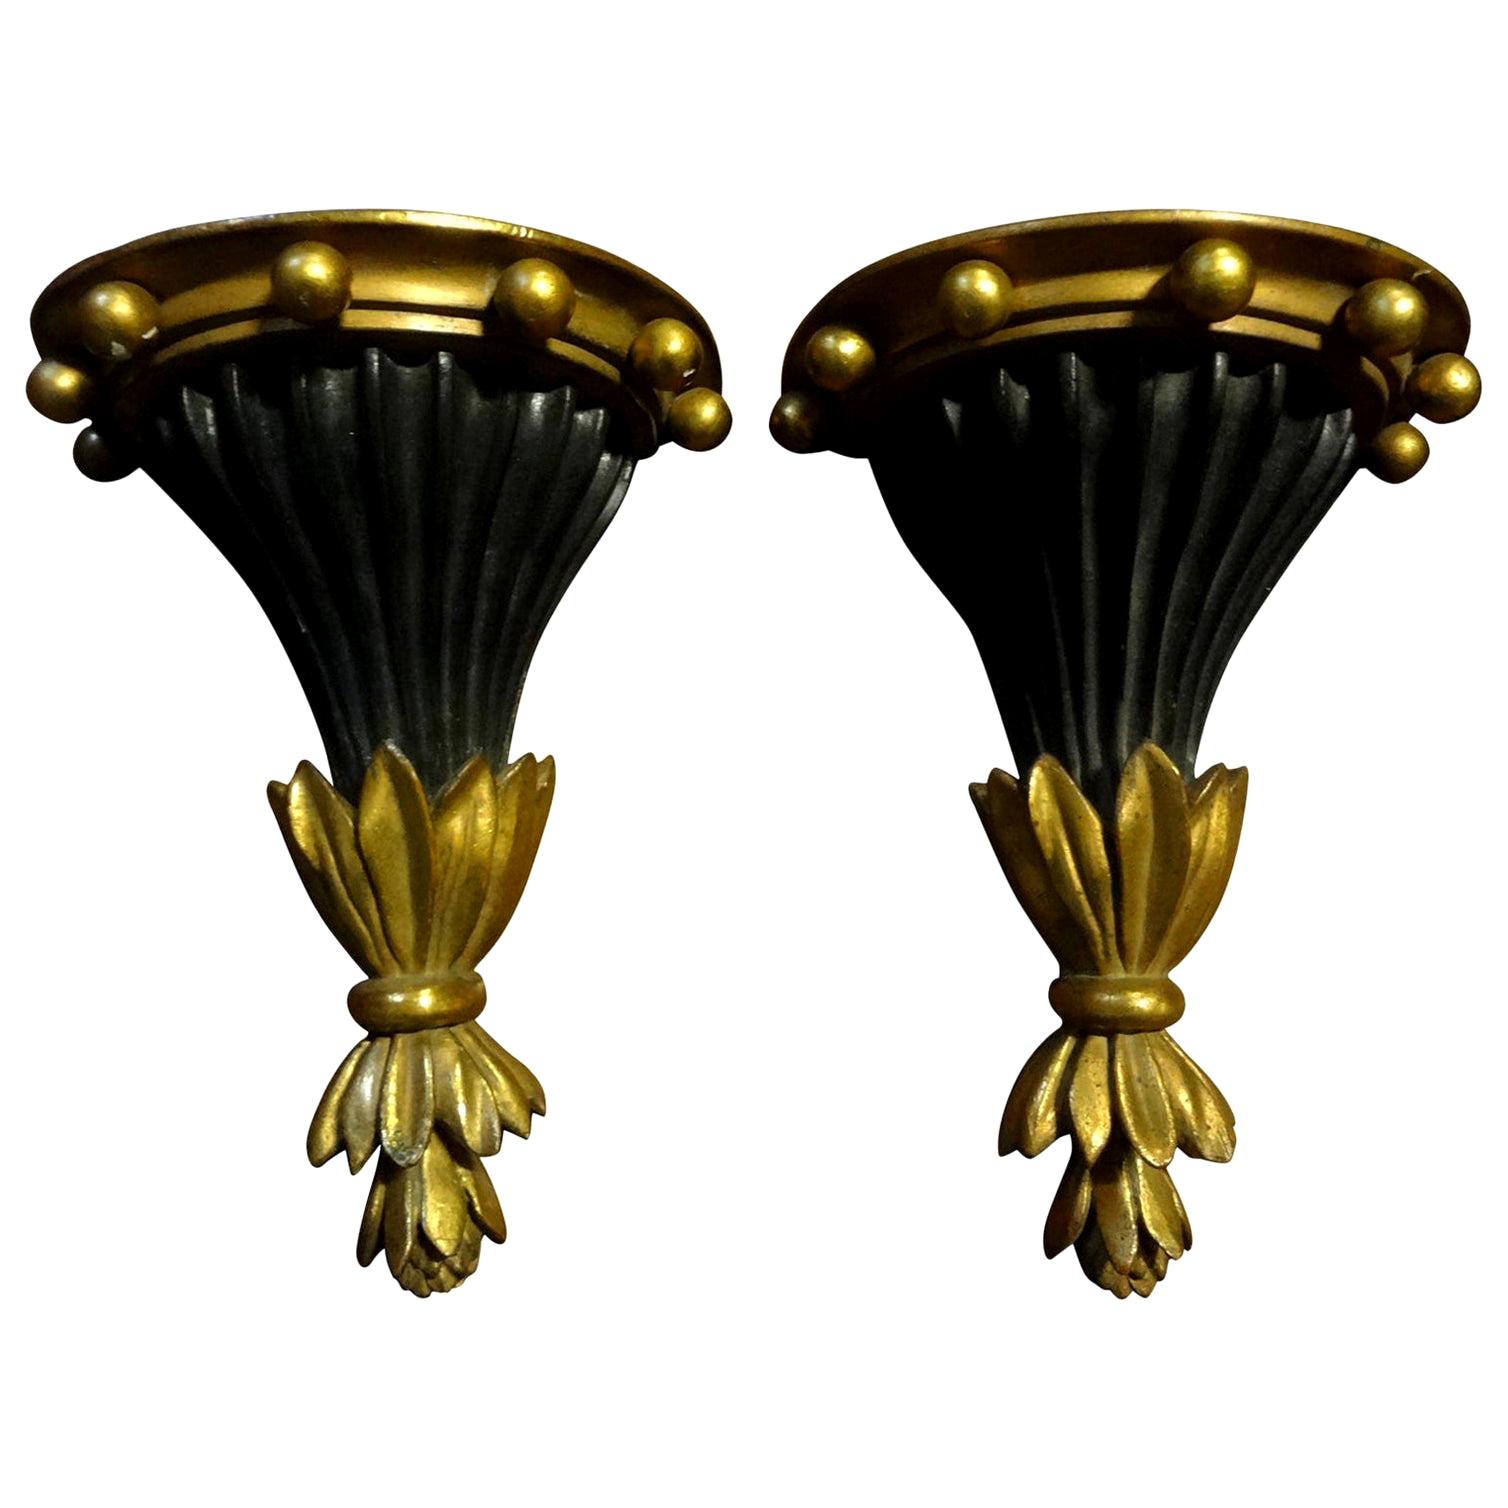 Pair of Italian Neoclassical Style Black and Gold Terracotta Wall Brackets